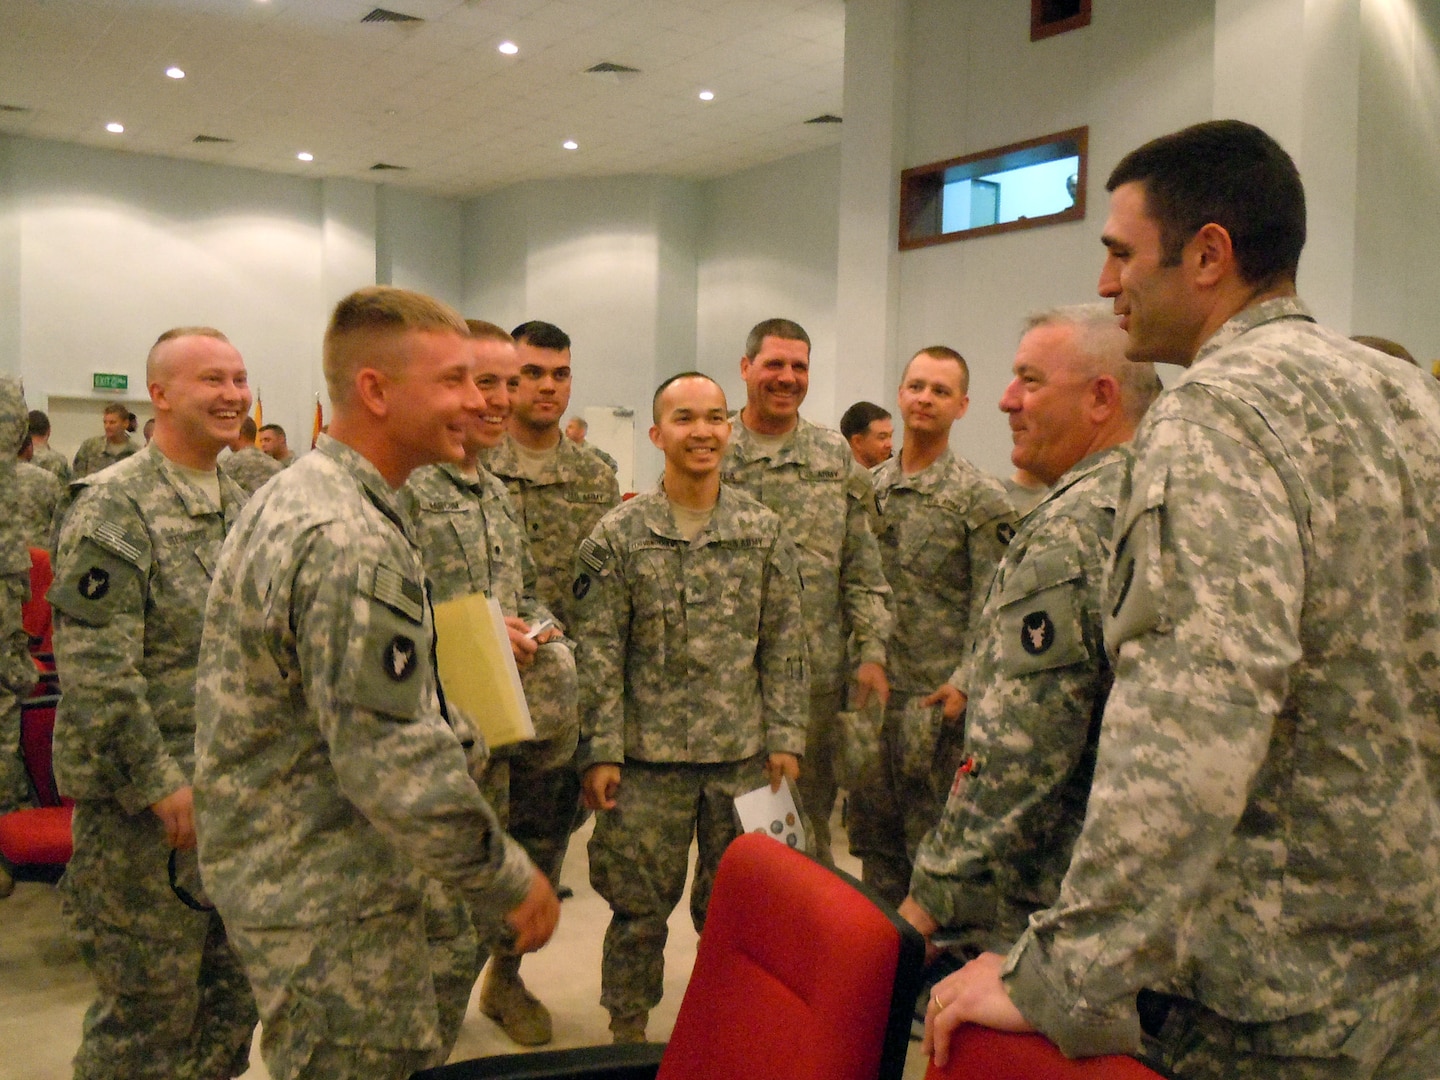 Army 1st Lt. Christopher Bingham (right), commander of Company C, 1st Combined Arms Battalion, 194th Armor; Army 1st Sgt. Tim Flahave (2nd from right), Company C first sergeant, and other Soldiers from Charlie Company 1-194 CAB greet and congratulate Army Spc. Yaroslav Sergei Dmytrochenko (2nd from left) after becoming a naturalized U.S. citizen. Company C, a Minnesota Army National Guard unit, is deployed to Kuwait with the 1st Brigade Combat Team, 34th Infantry Division, in support of Operation New Dawn.